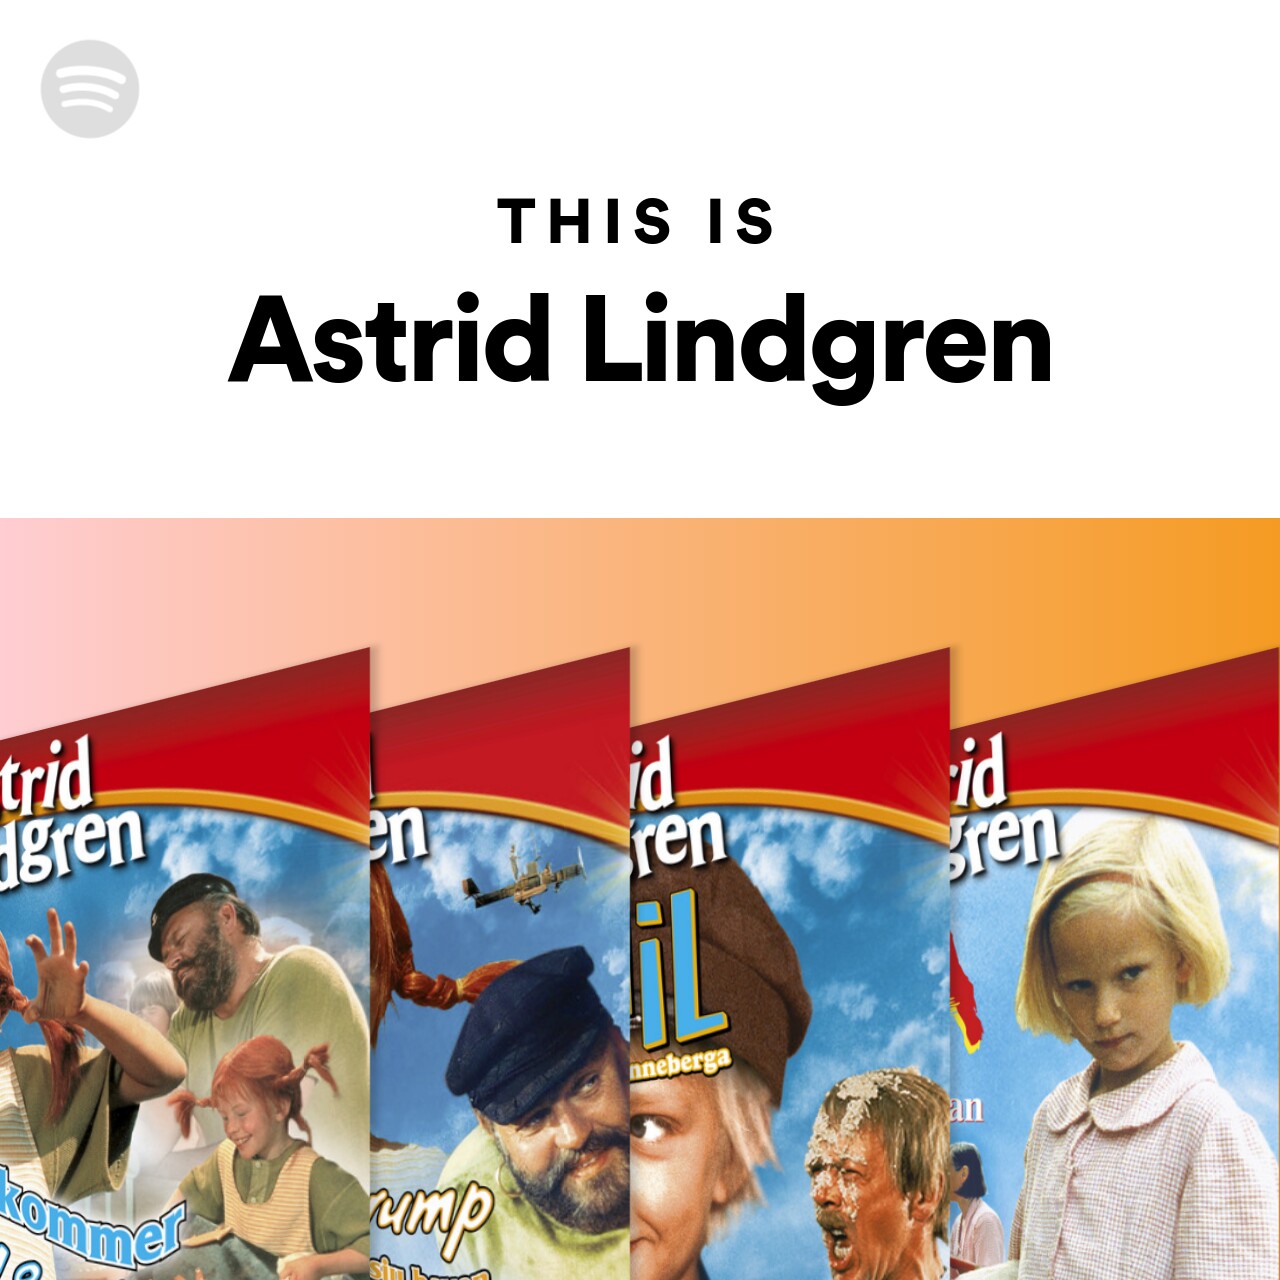 This Is Astrid Lindgren